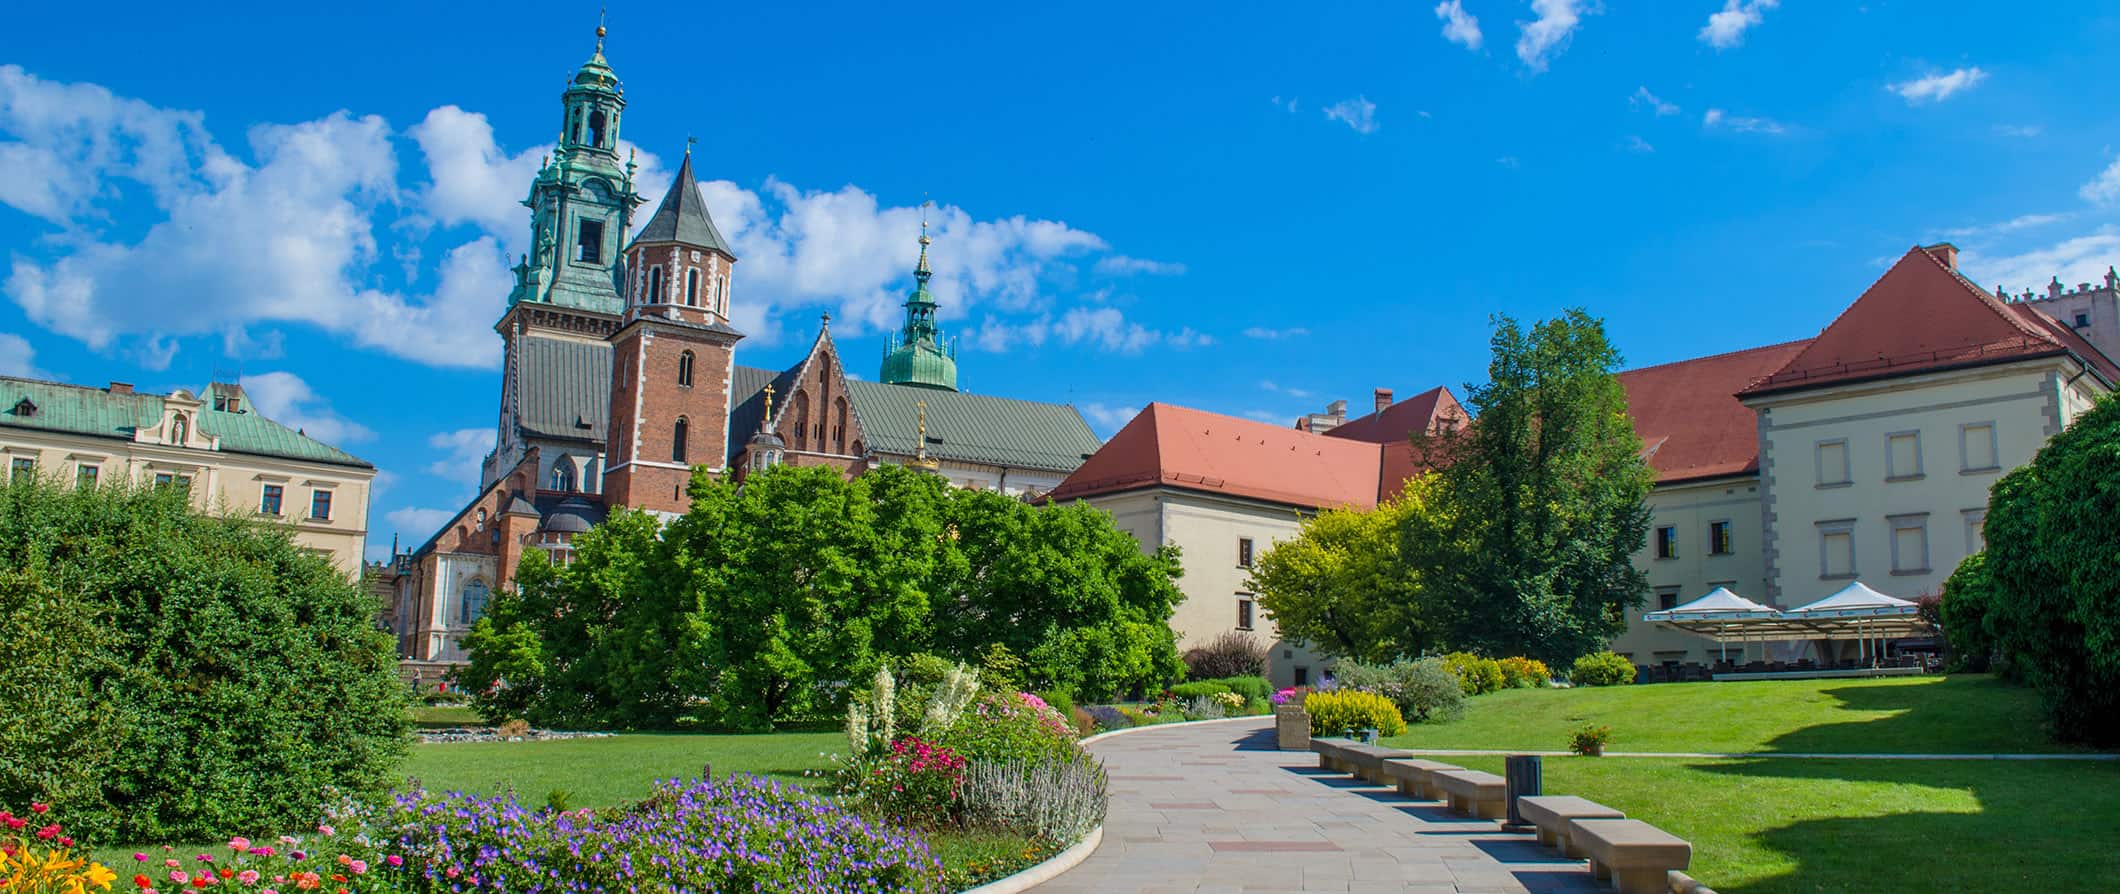 Colorful and historic architecture in Poland on a sunny summer day